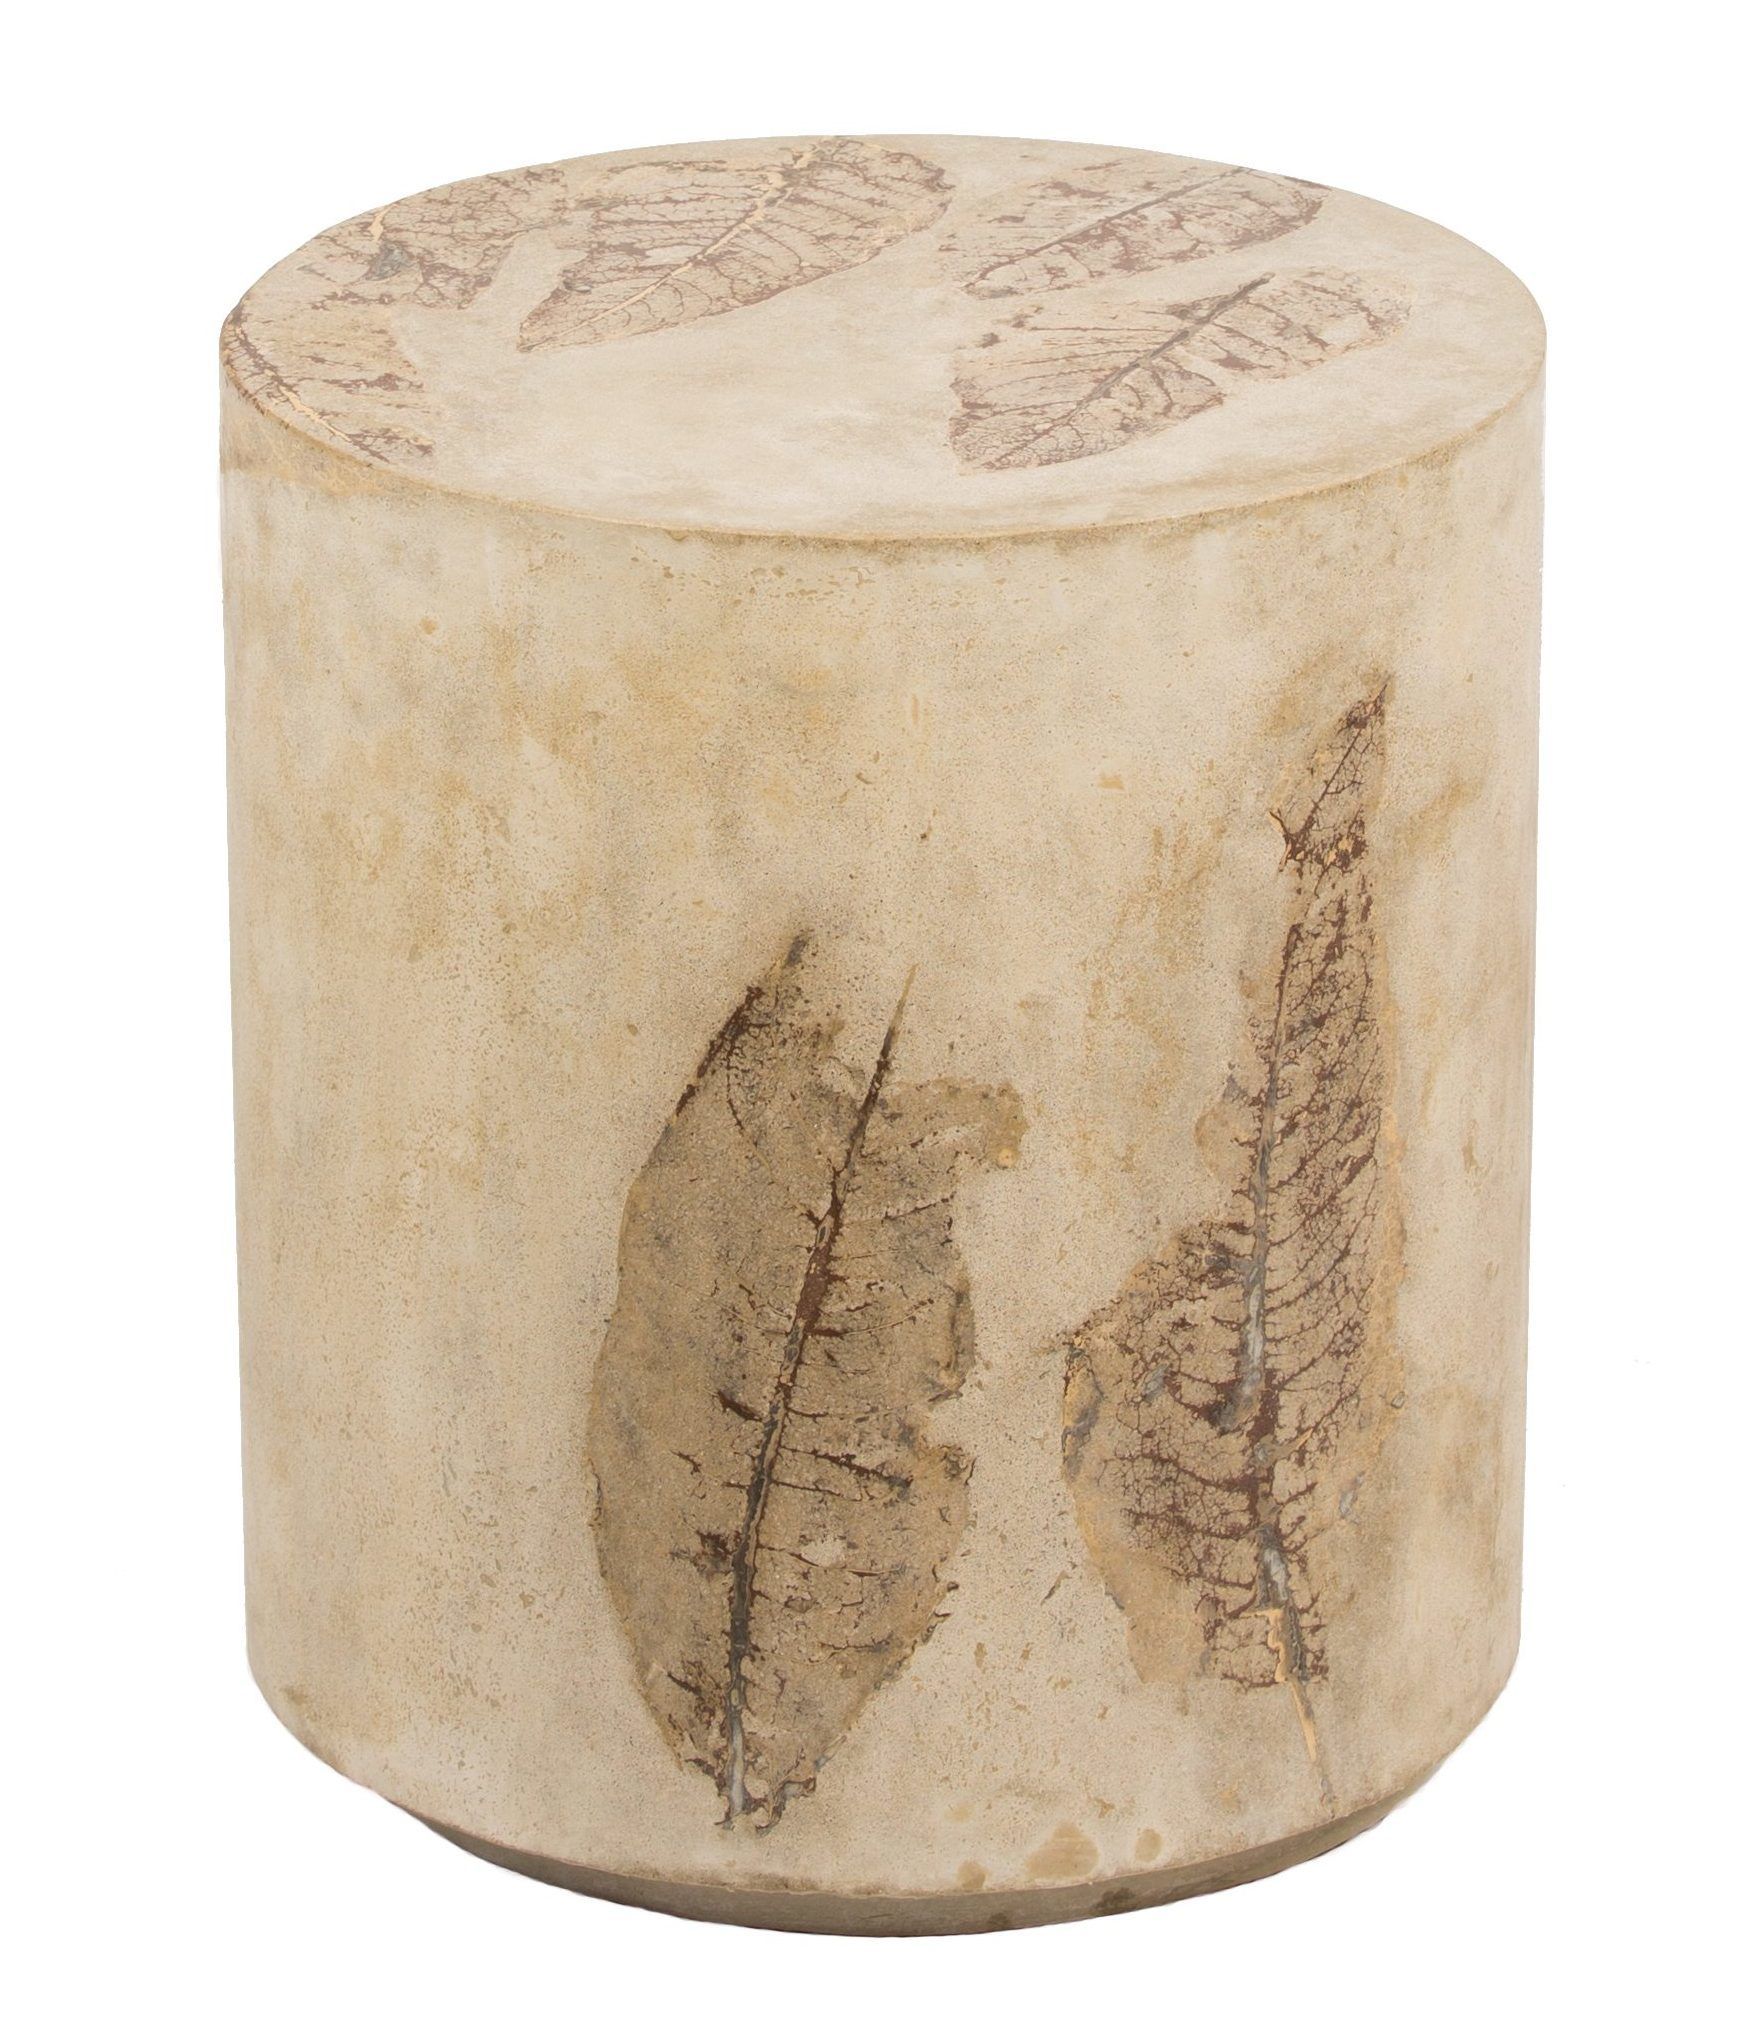 concrete stool with rotted leaf design on sides